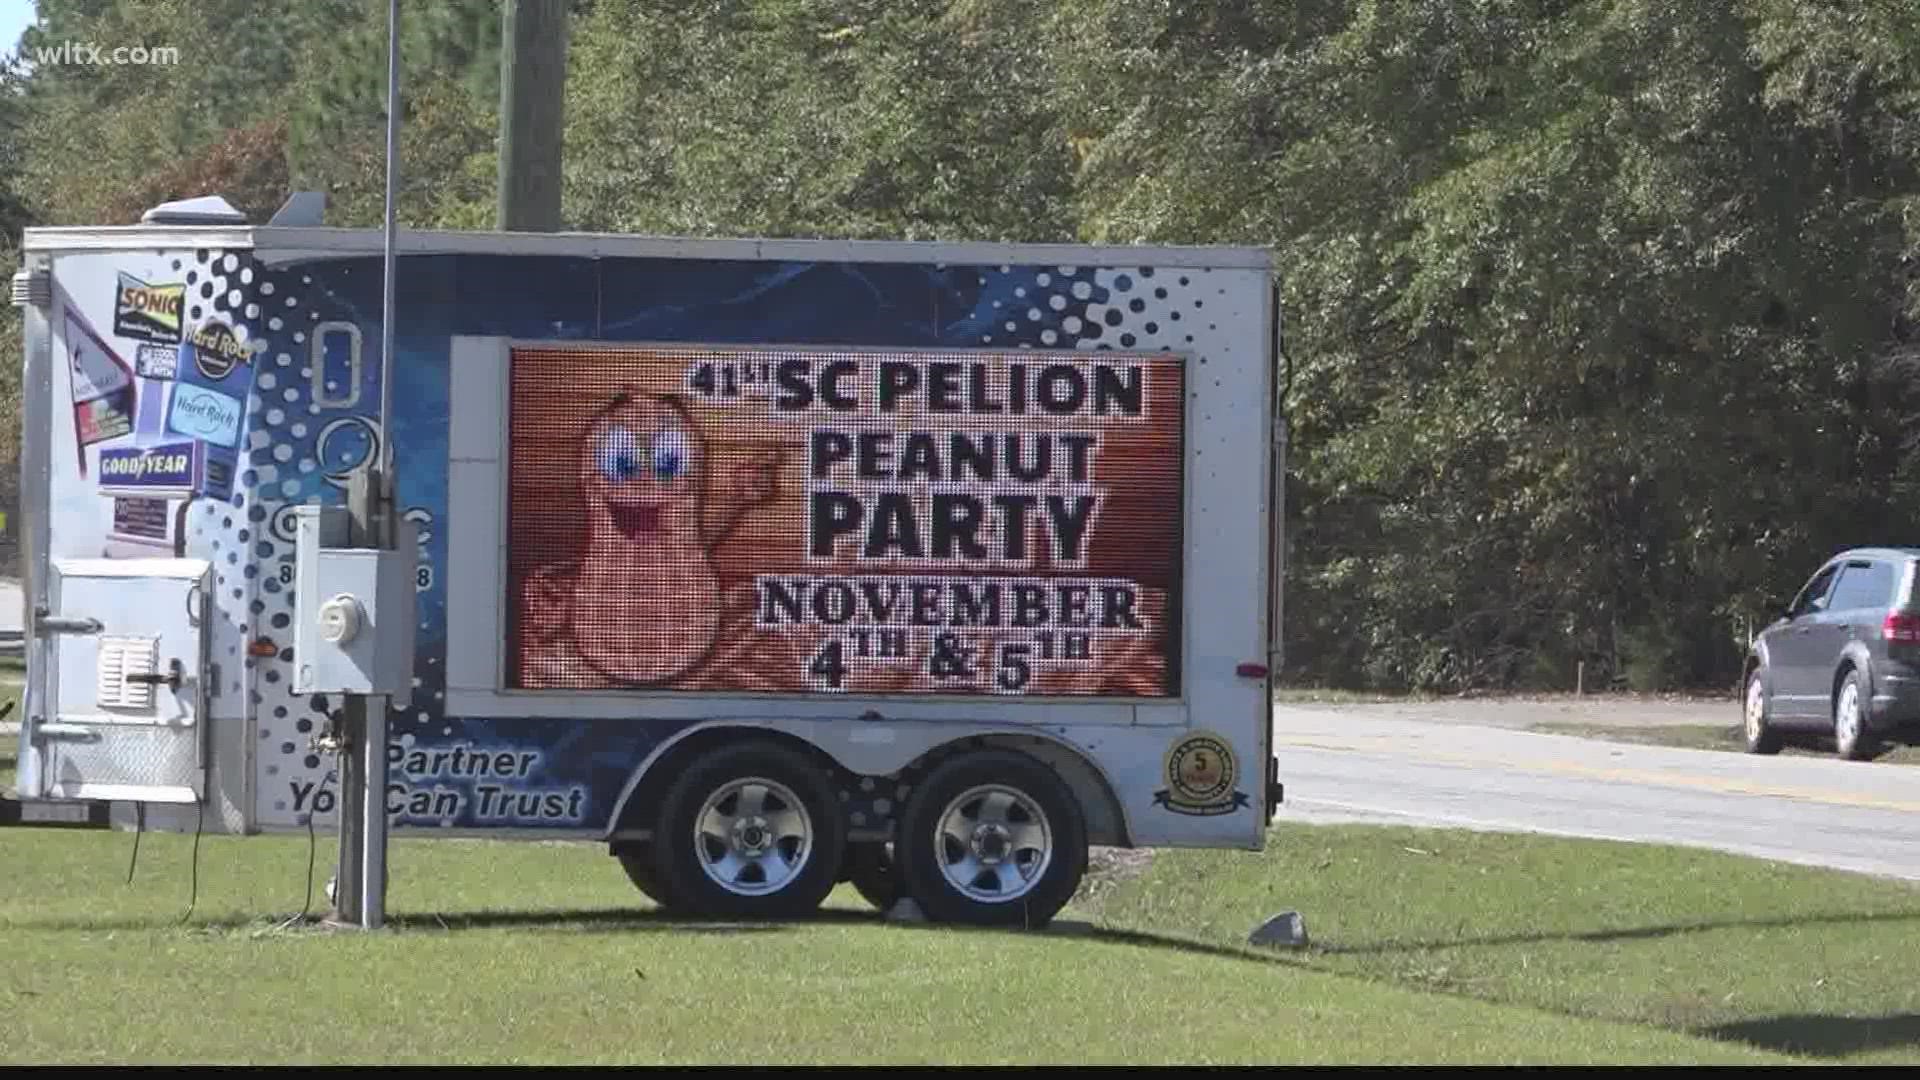 if you enjoy peanuts, then you'll want to head over to Pelion this weekend.